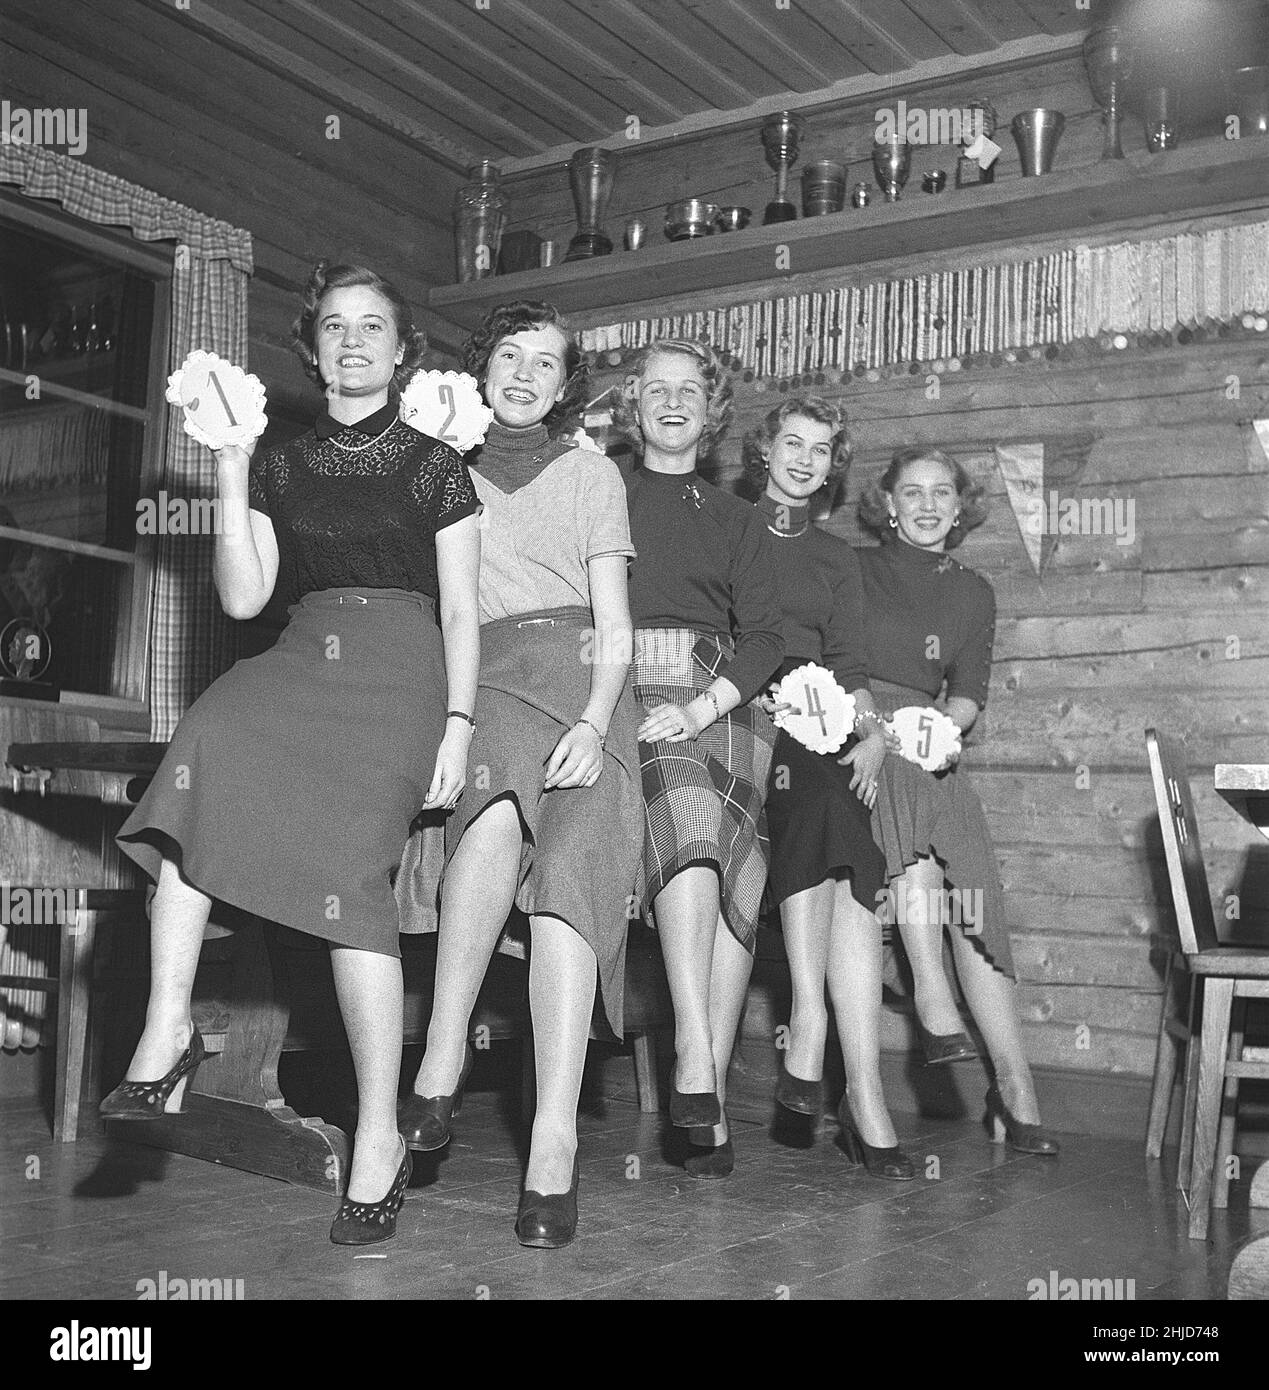 Women of the 1950s. Five young women each one holding a number from one to five. It's a rustic environment with timber walls. A beauty contest of some sort but the names of the girls are unknown. Sweden 1951 Kristoffersson ref BE66-7 Stock Photo